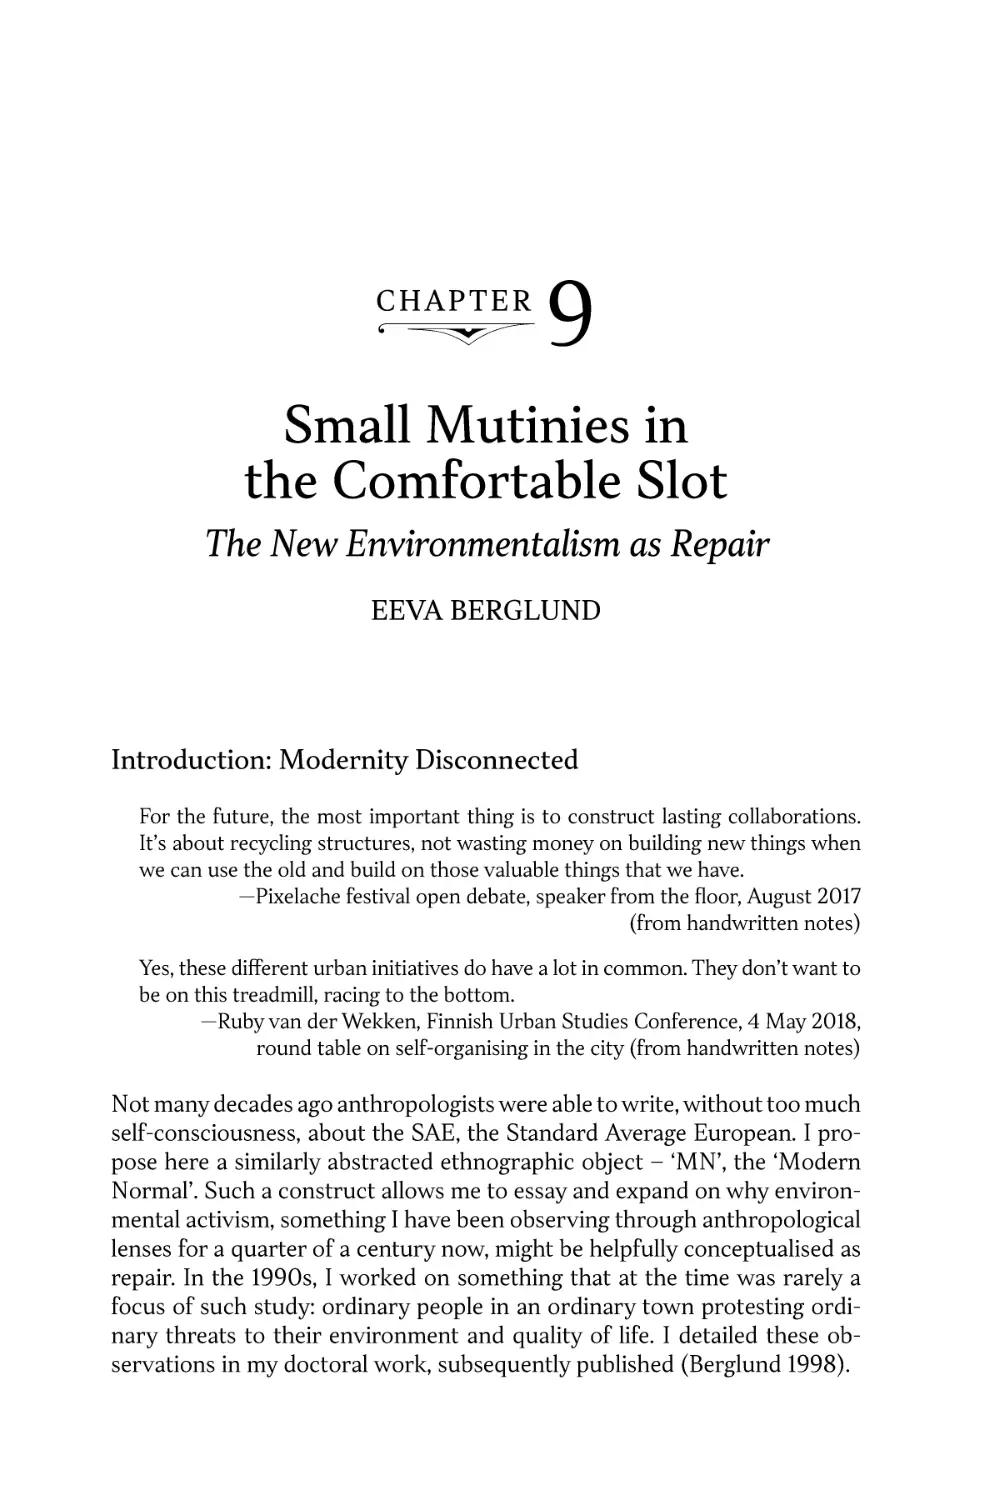 Chapter 9. Small Mutinies in the Comfortable Slot